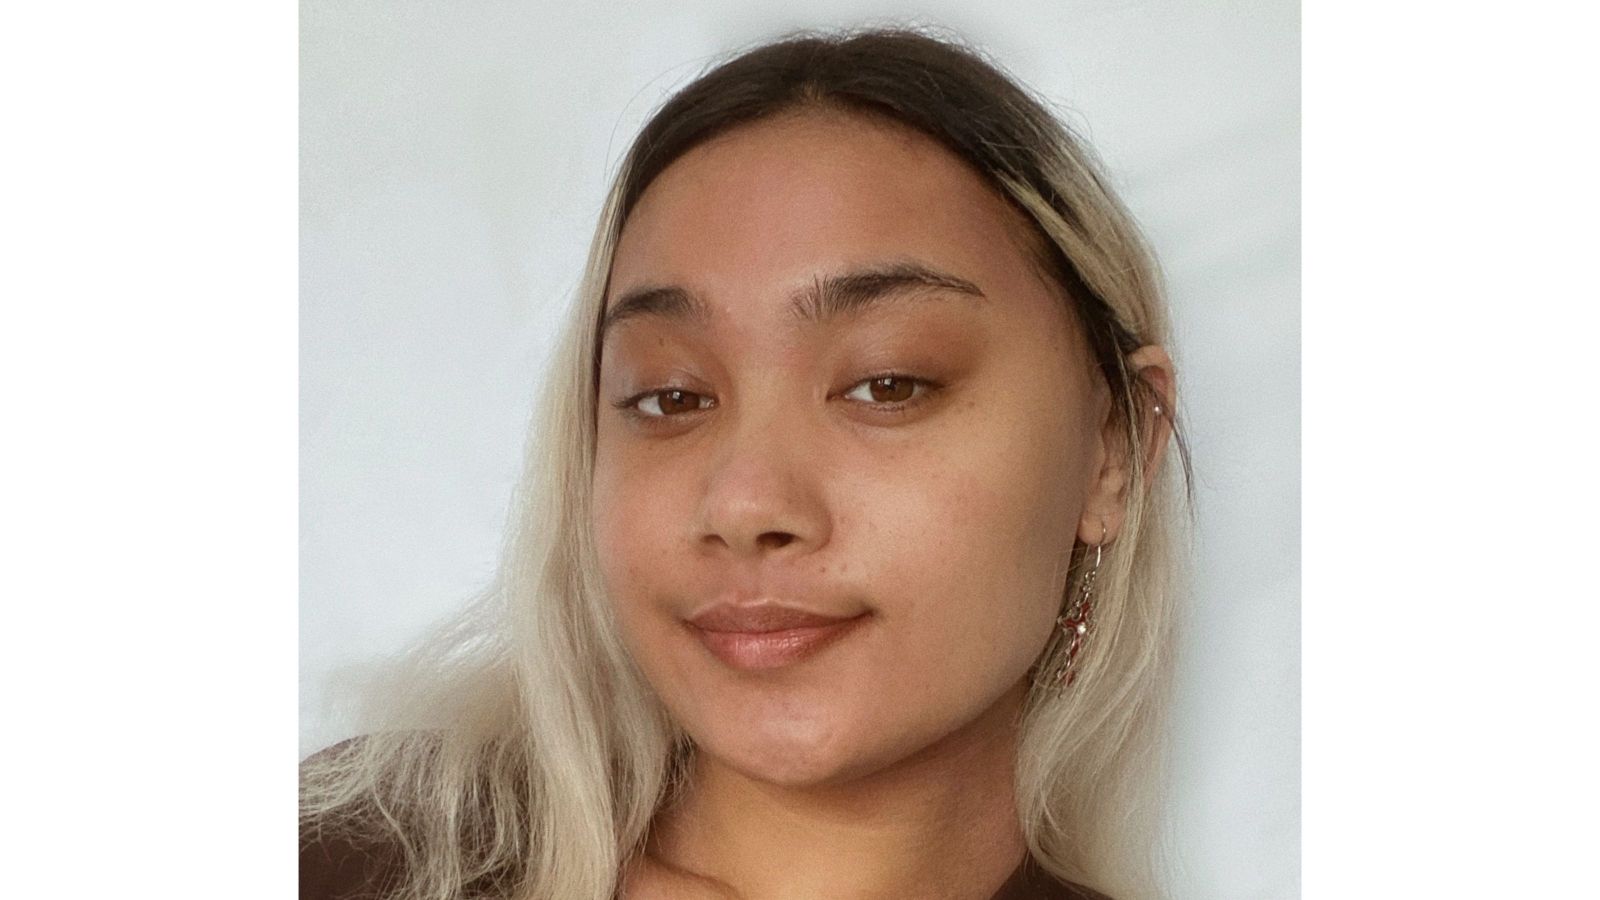 pasifika girl with dyed blond hair growing out, looking straight at camera